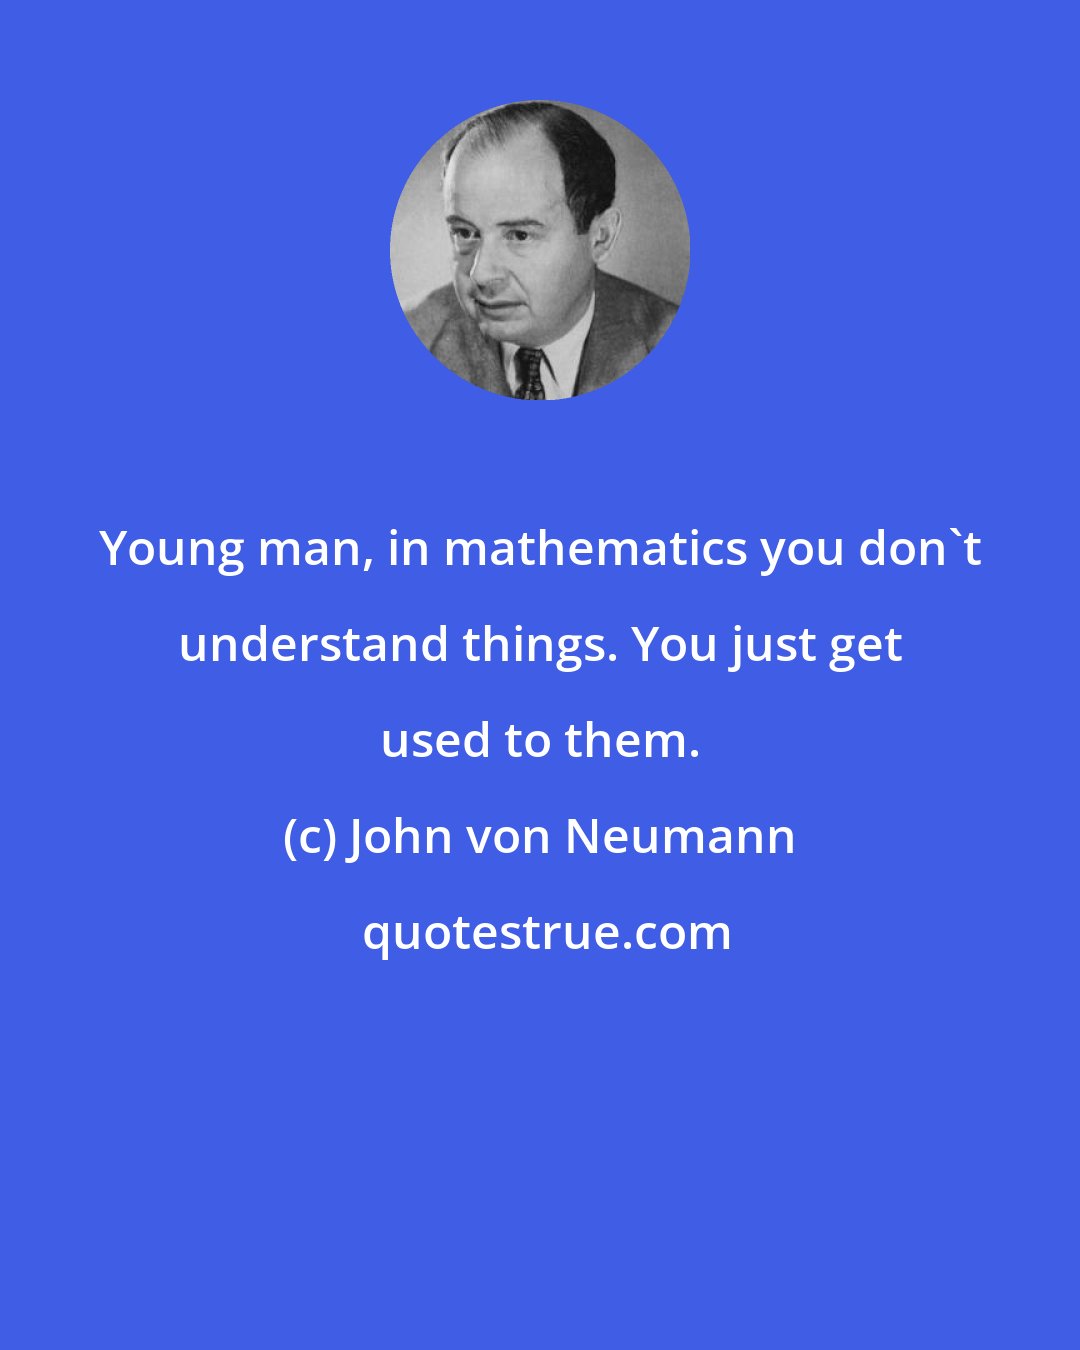 John von Neumann: Young man, in mathematics you don't understand things. You just get used to them.